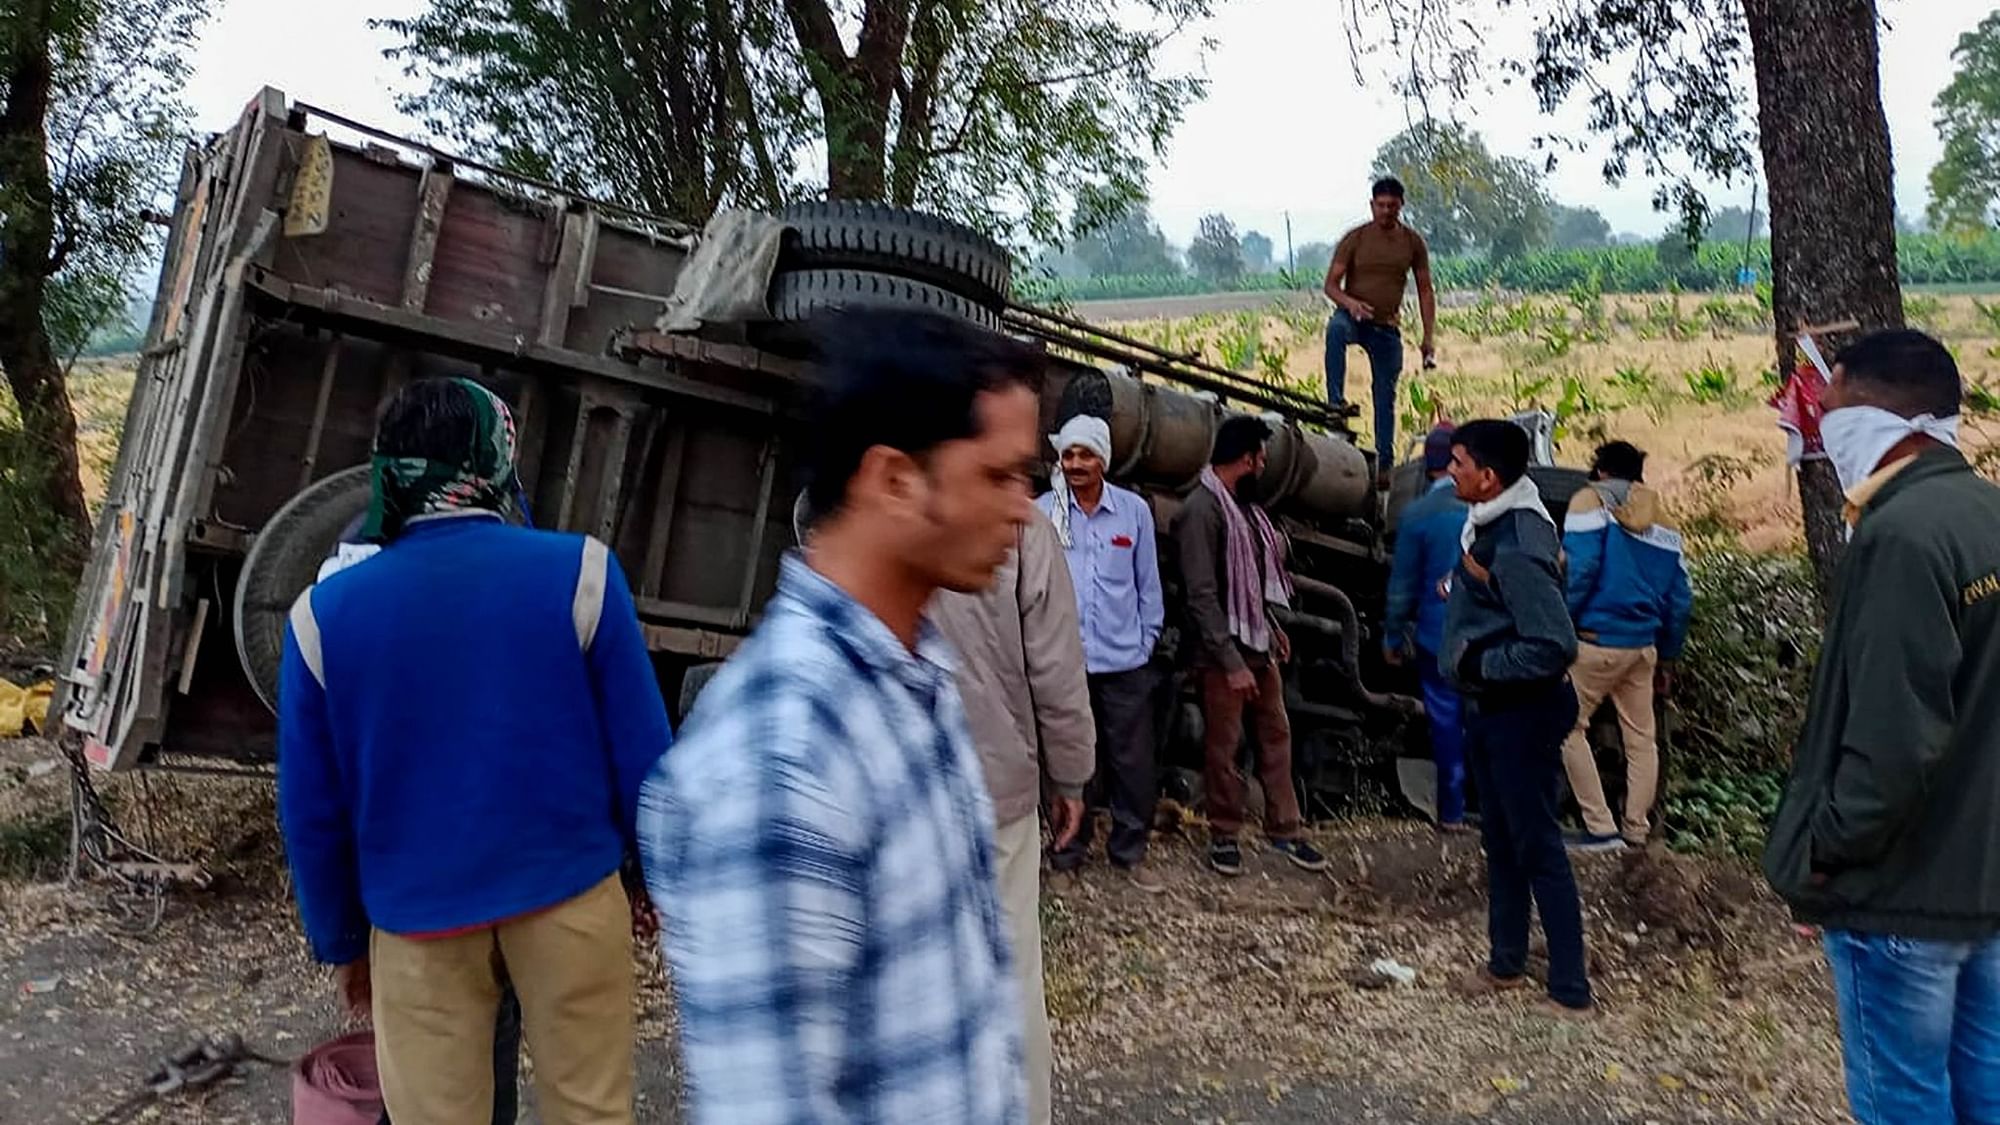 People gather near the mangled remains of a truck after it overturned near Kingaon village, killing at least 16 labourers, in Jalgaon district of Maharashtra, Monday, 15 February.